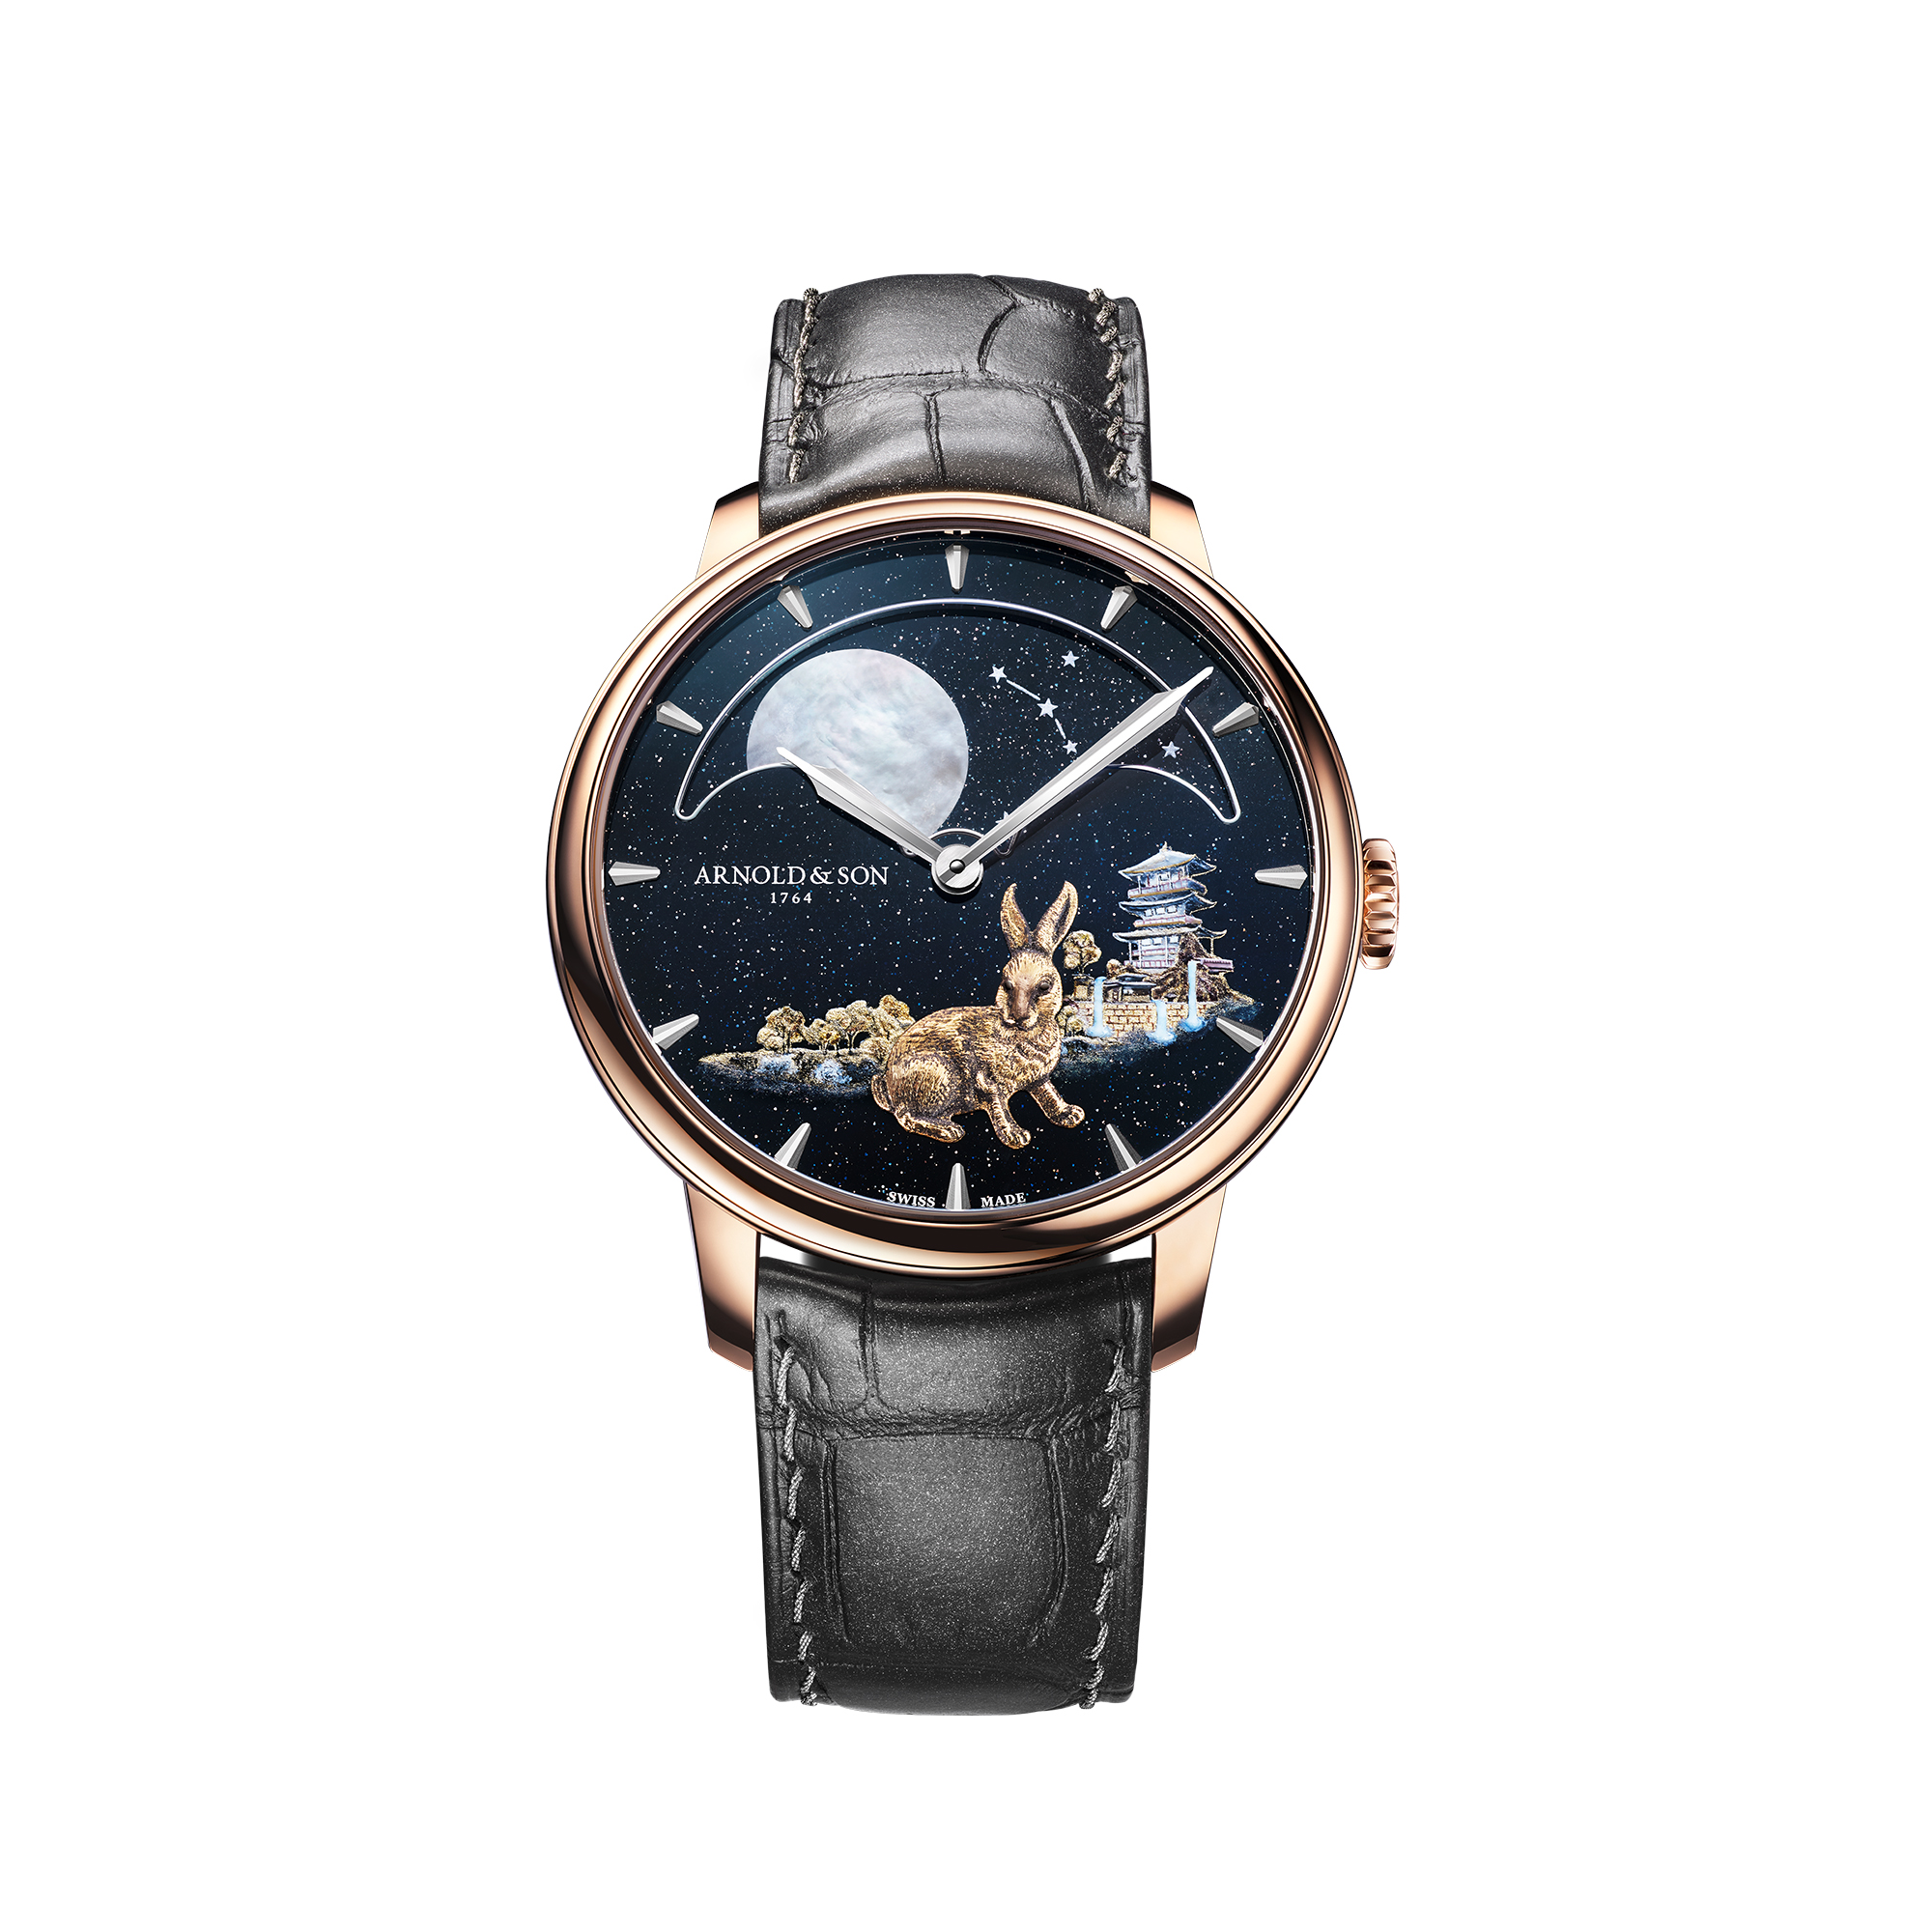 Hare Meets Moon in Arnold & Son’s Tribute to the Chinese New Year